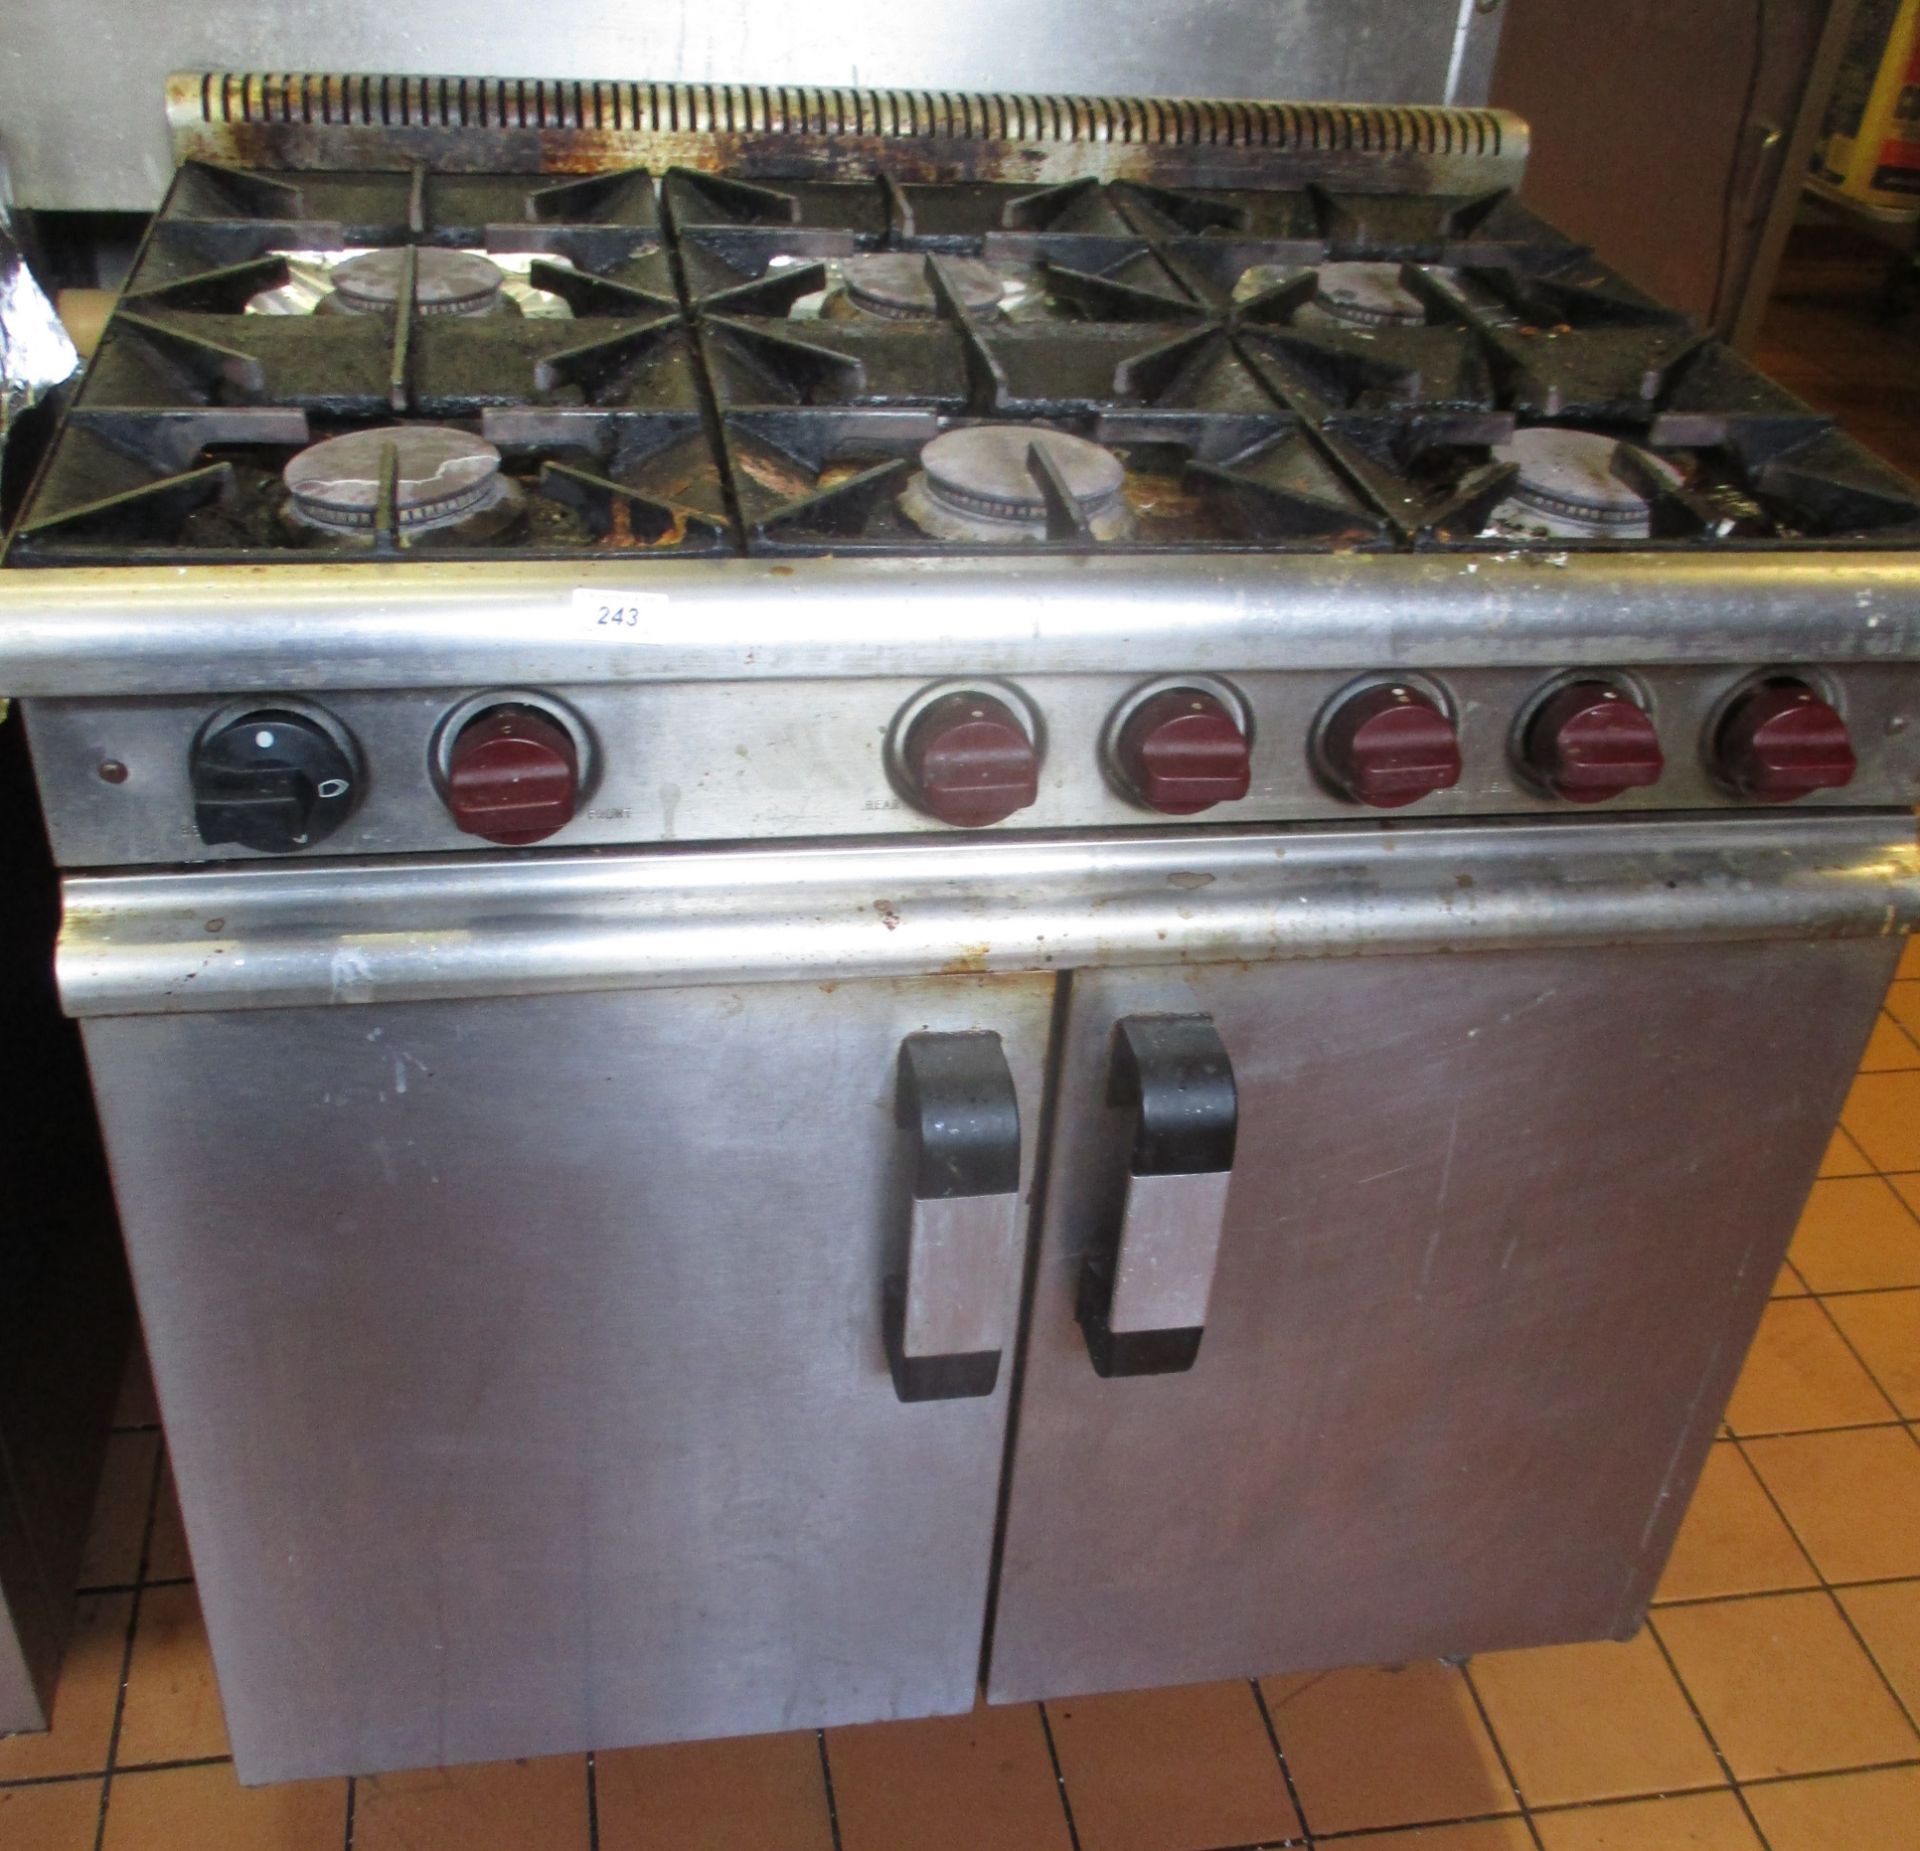 A stainless steel 6 burner two door gas cooker/oven.